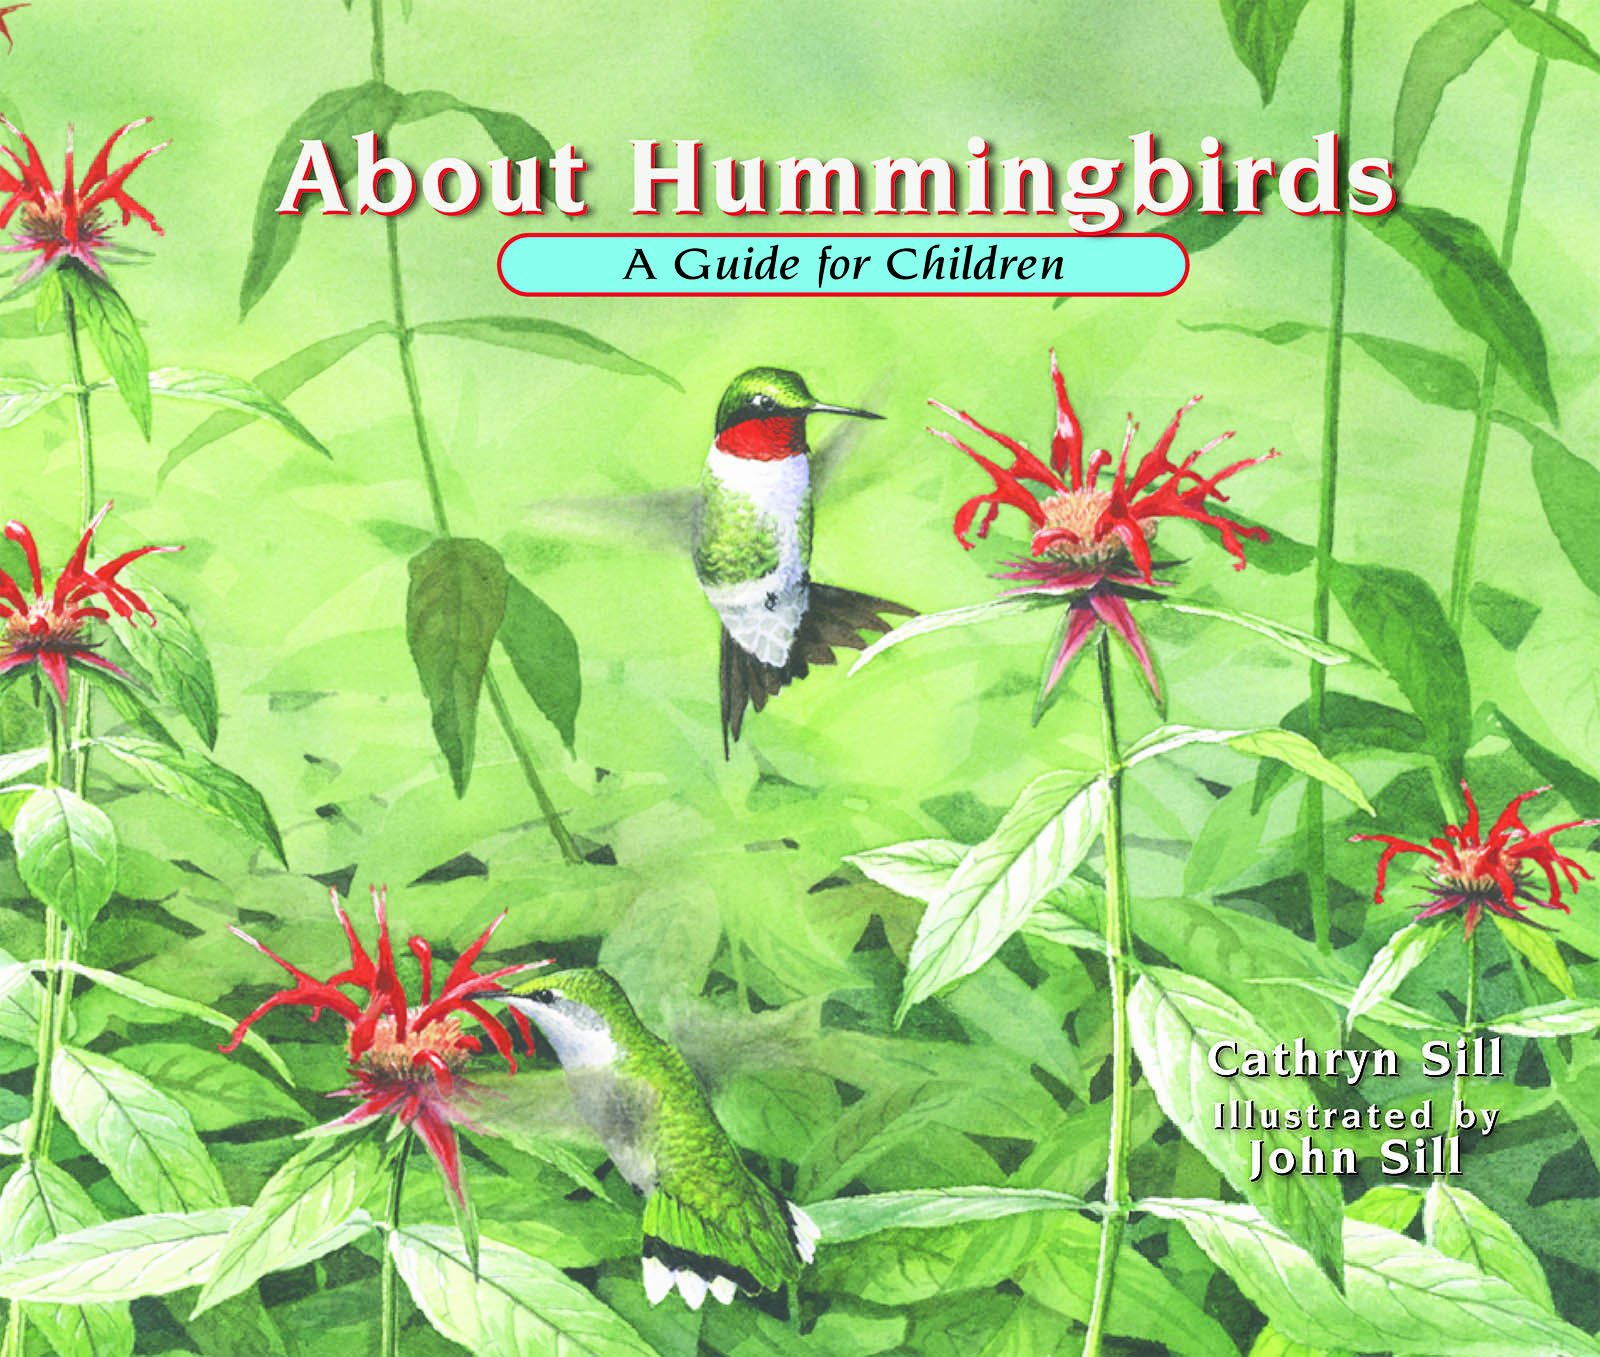 About Hummingbirds: A Guide for Children